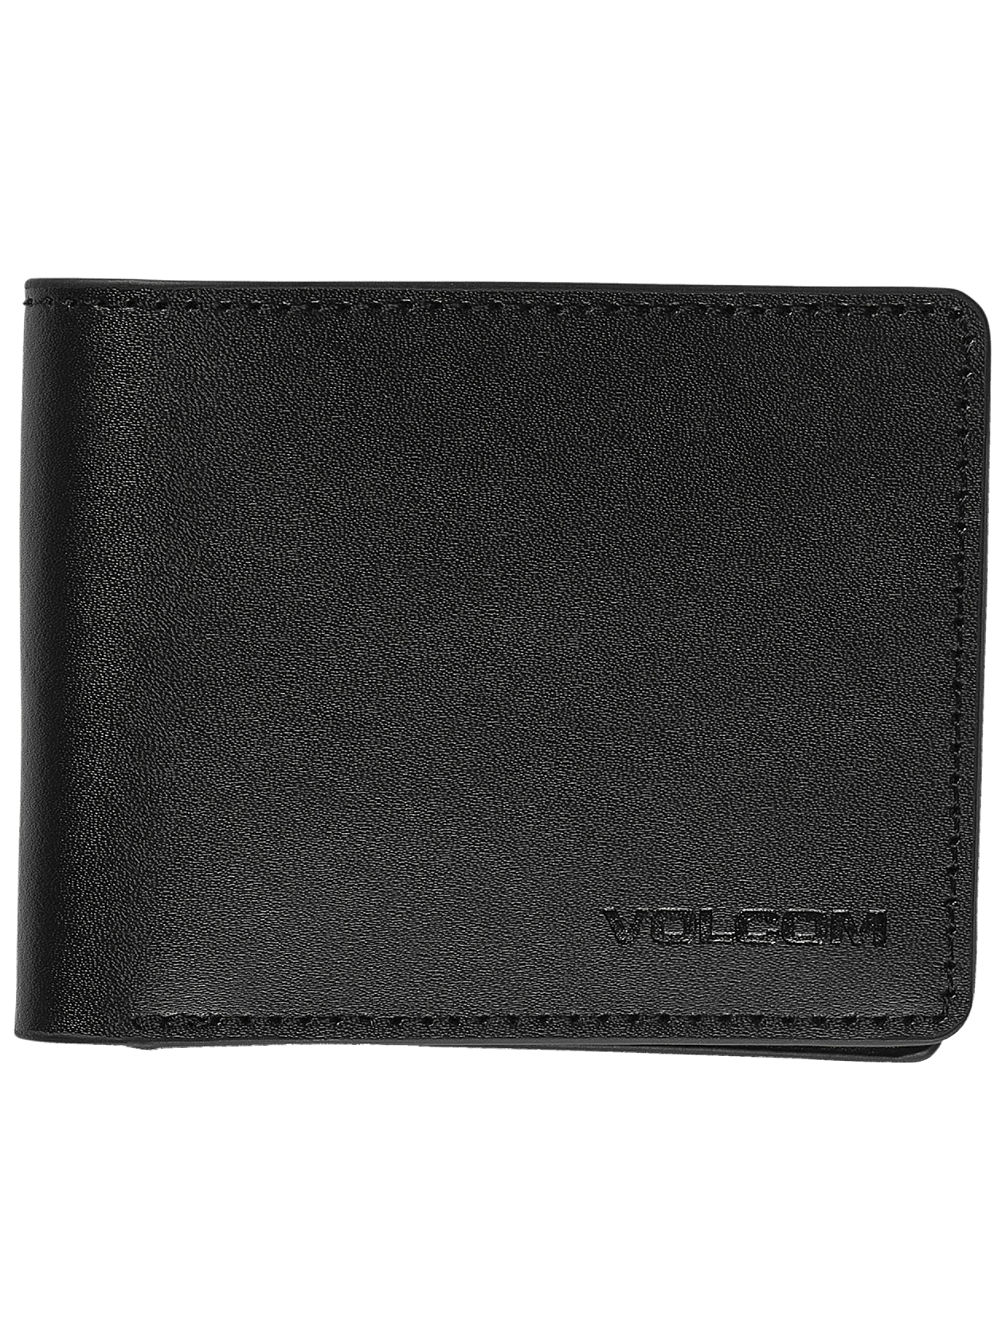 Evers Leather Portefeuille